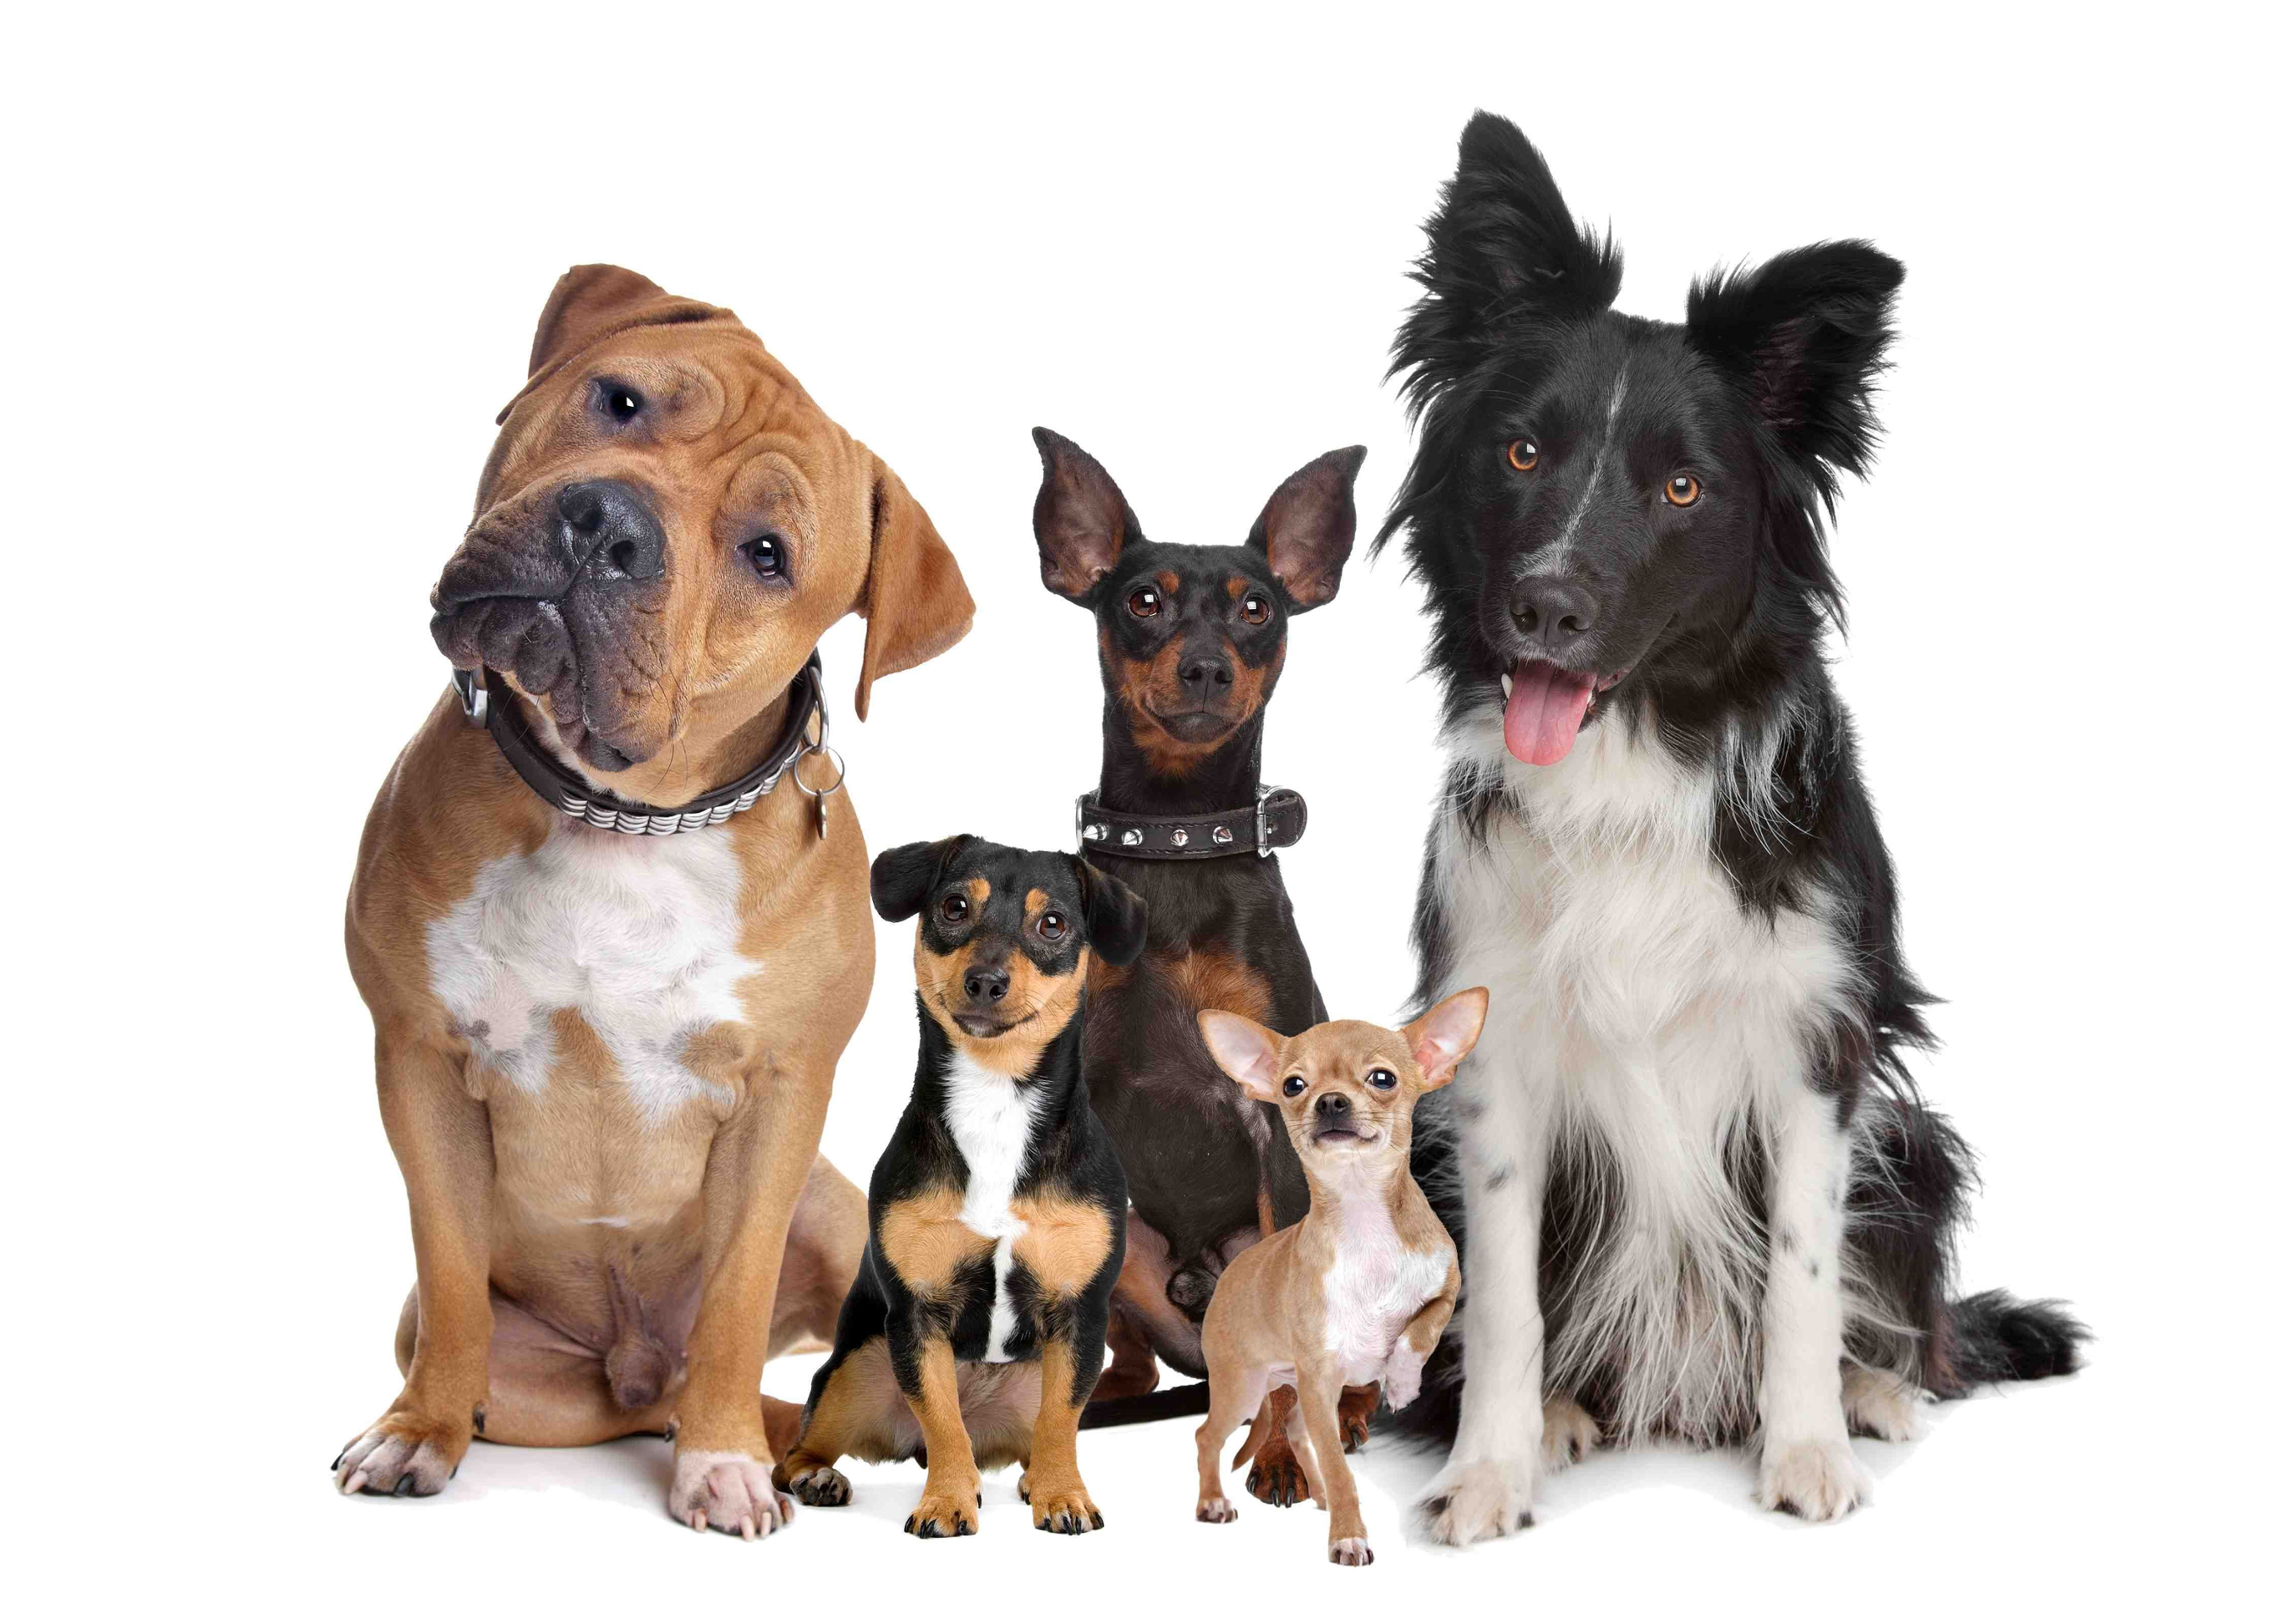 animal, dog, border collie, chihuahua, dogs